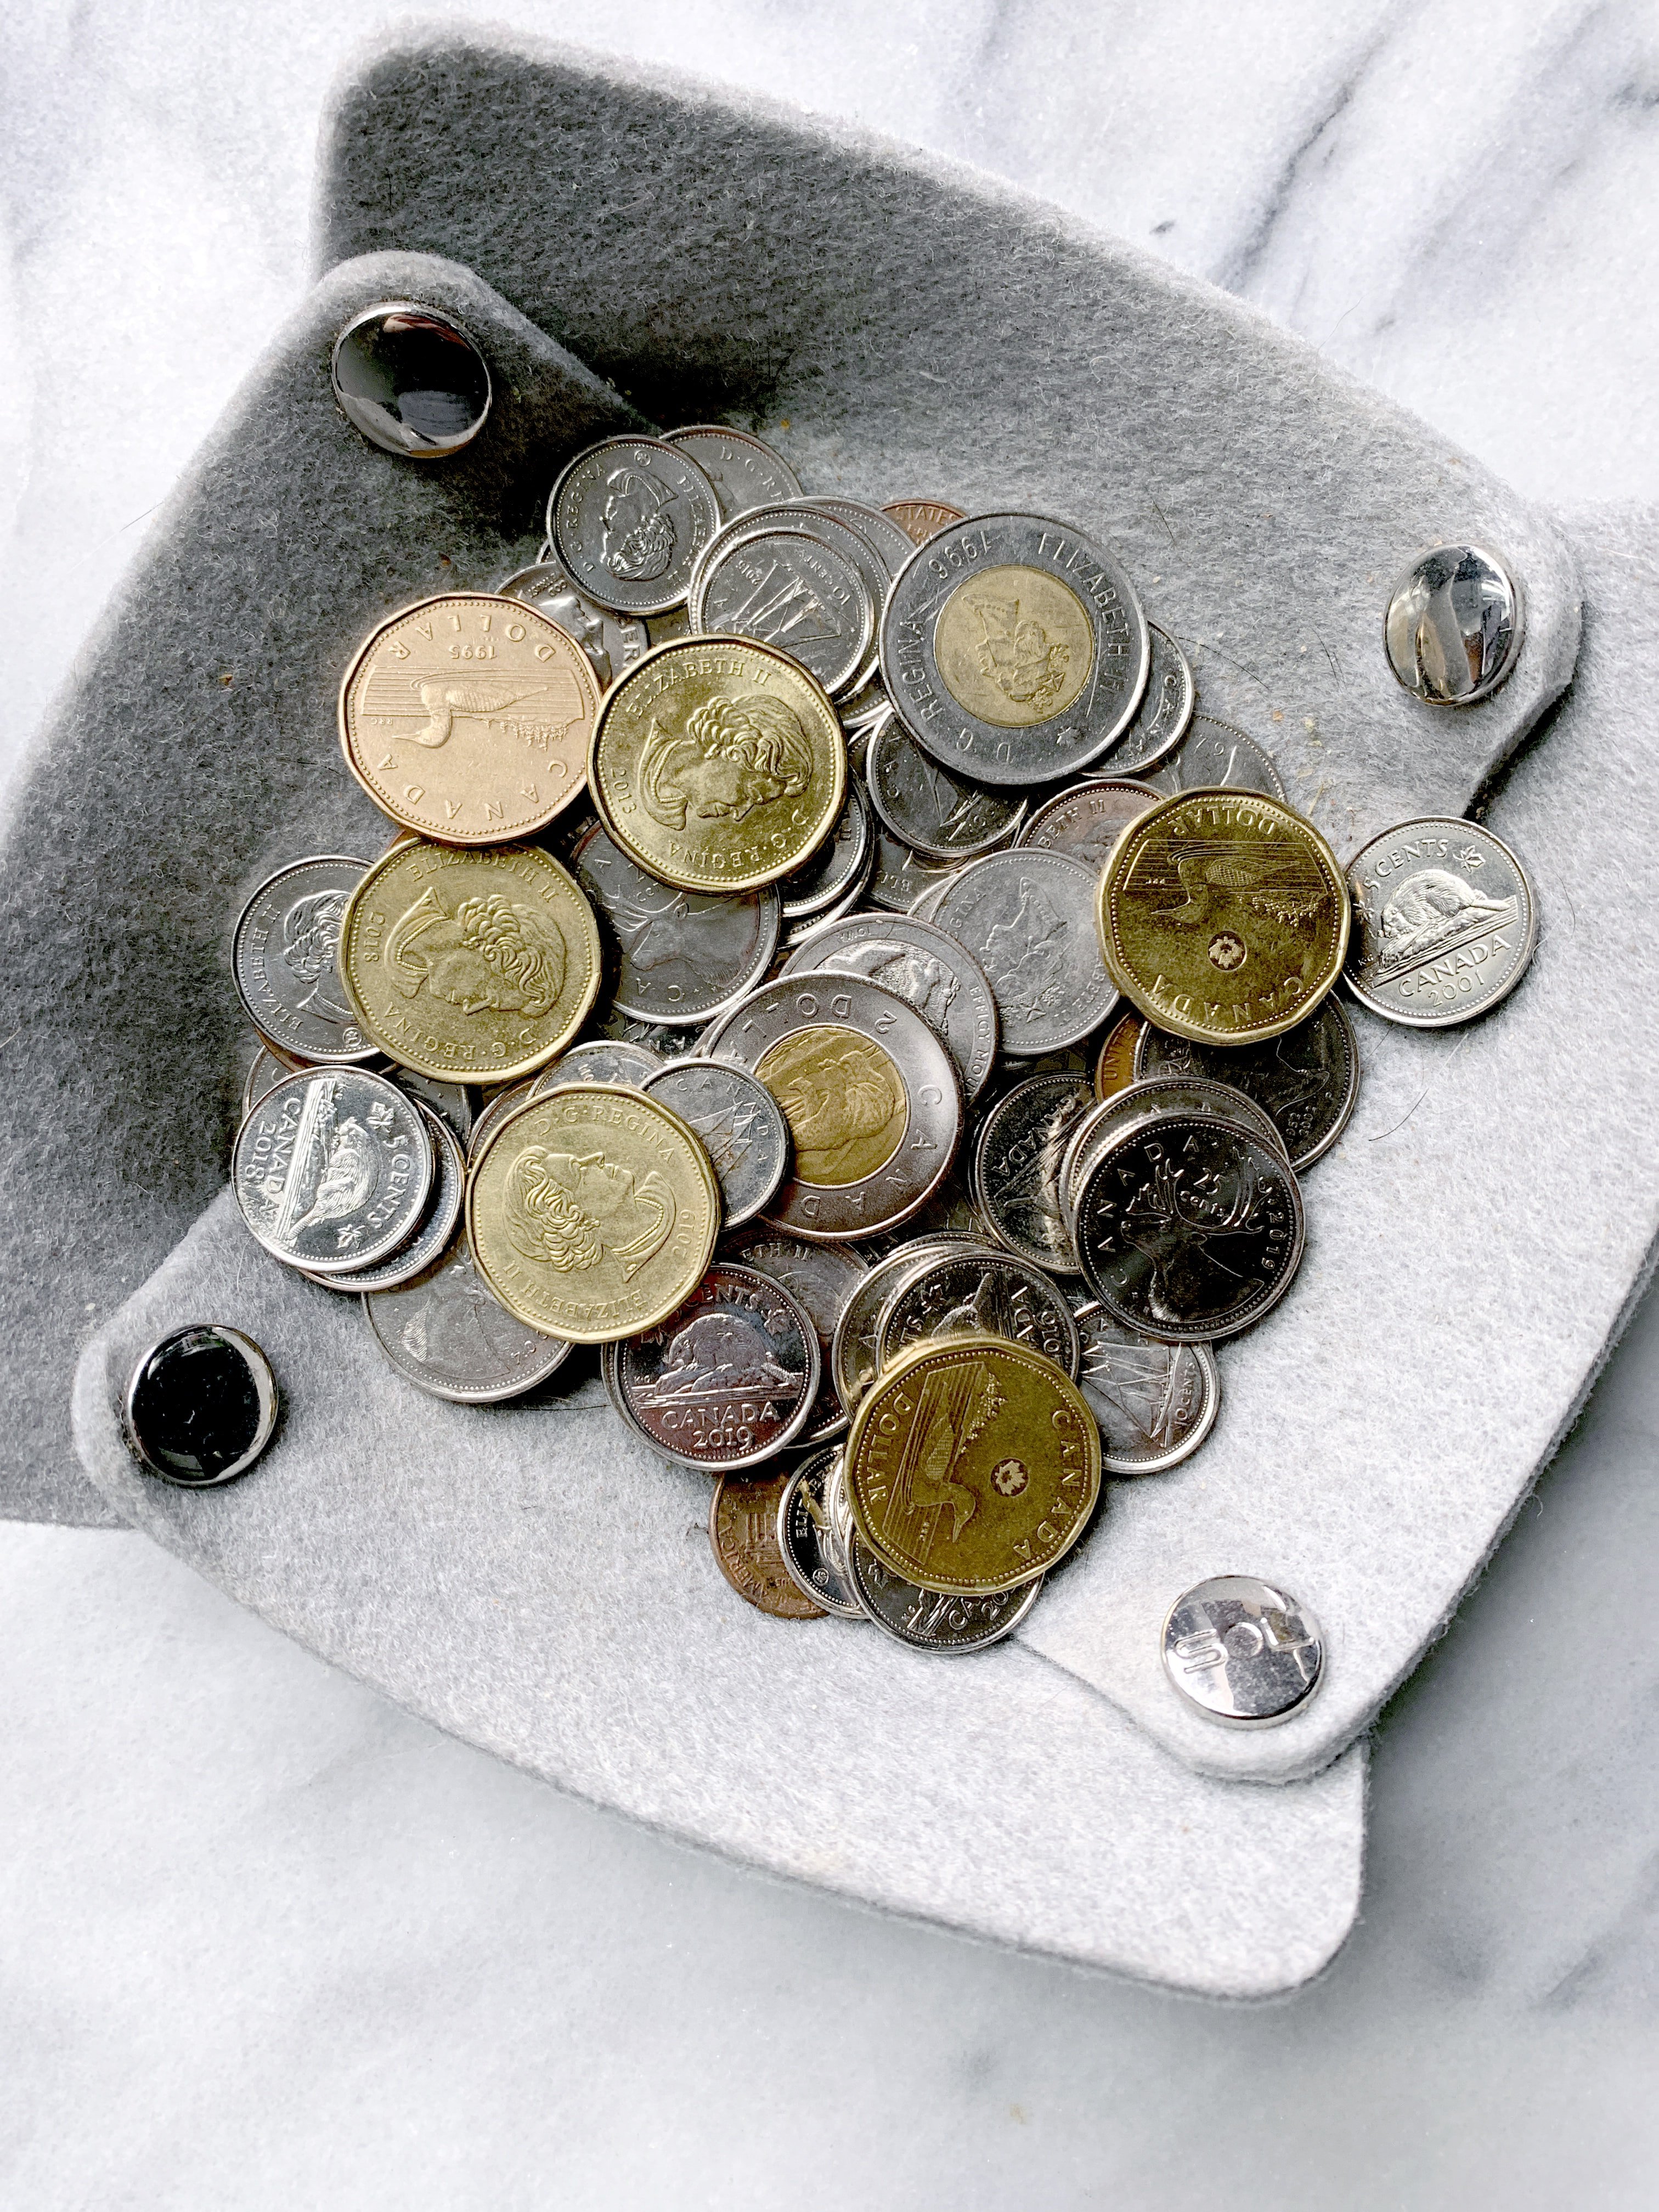 Featured image: Canadian coins on a grey surface - Read full post: Advanis survey finds lower-income households and BIPOC Canadians are hit hardest by increases in consumer prices